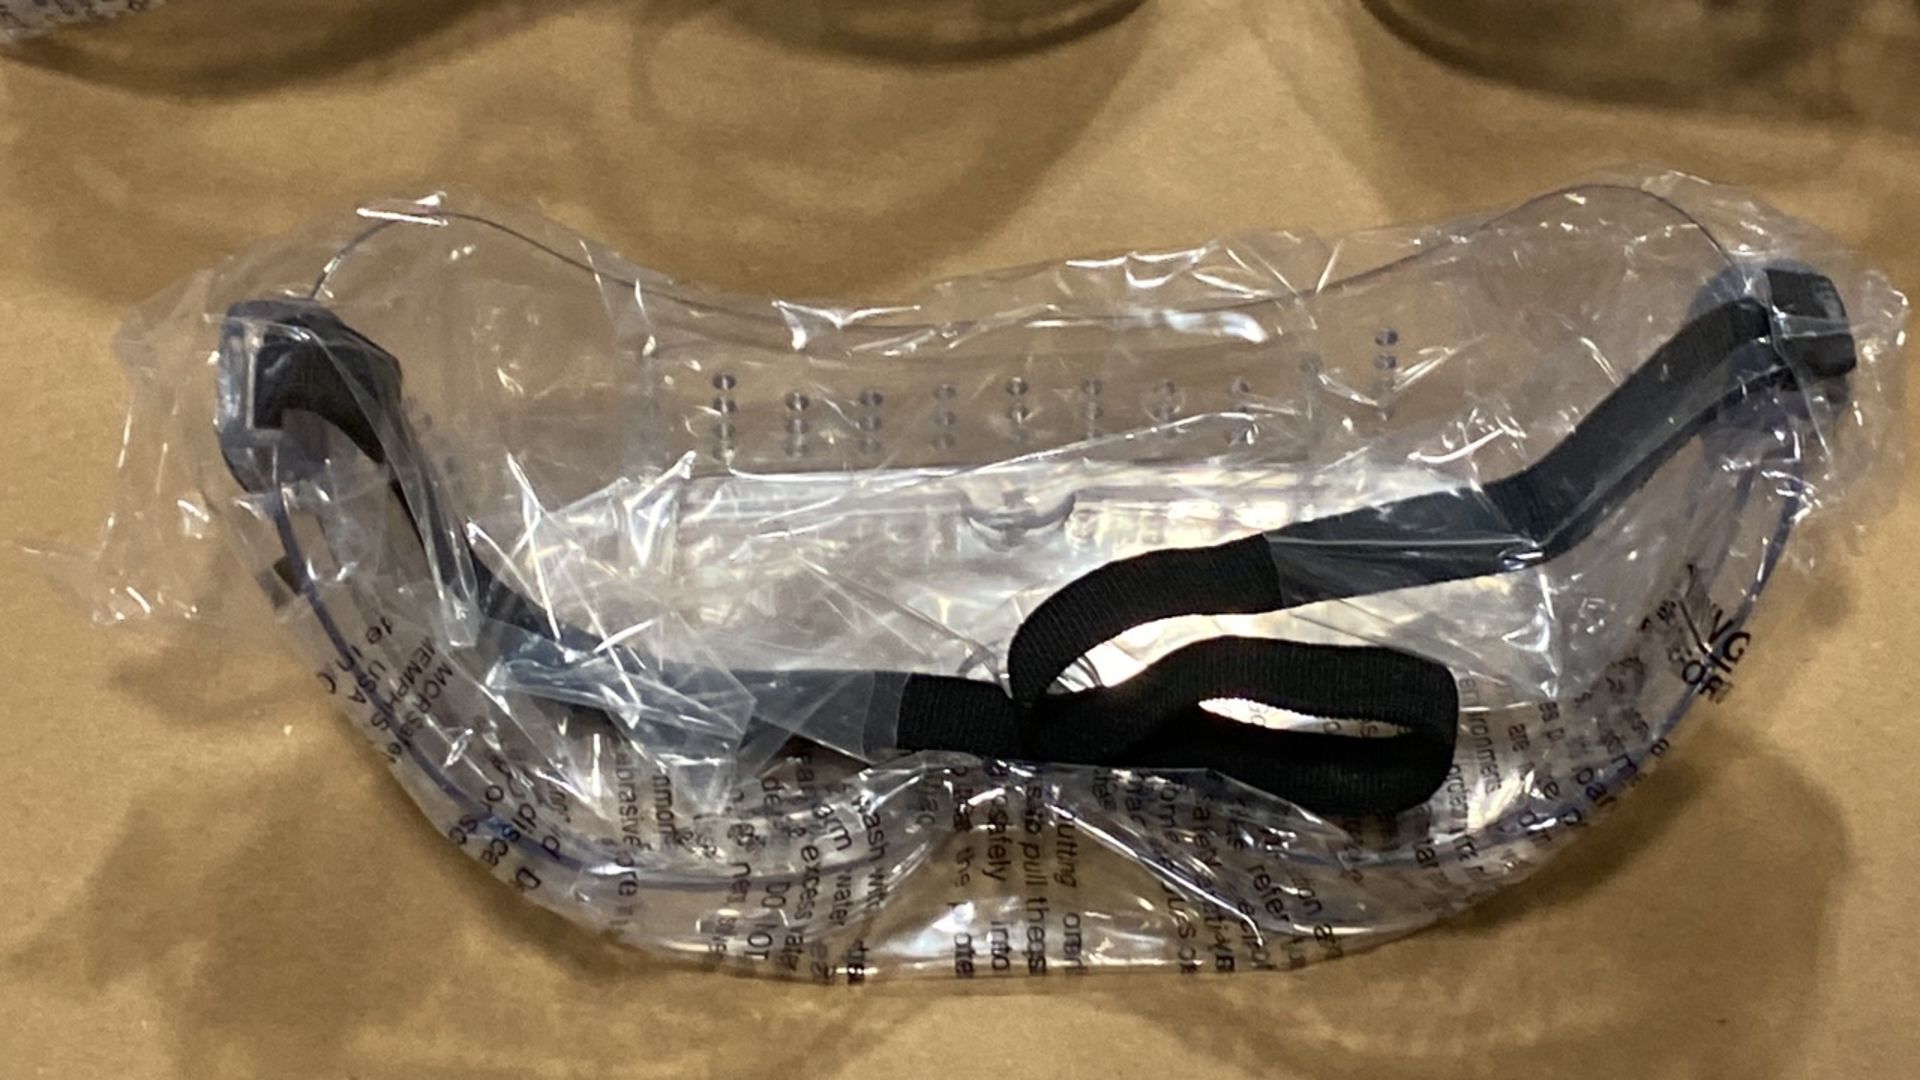 CREWS SAFETY GOGGLES QTY:24 CASES/ 144 UNITS PER CASE - Image 3 of 8